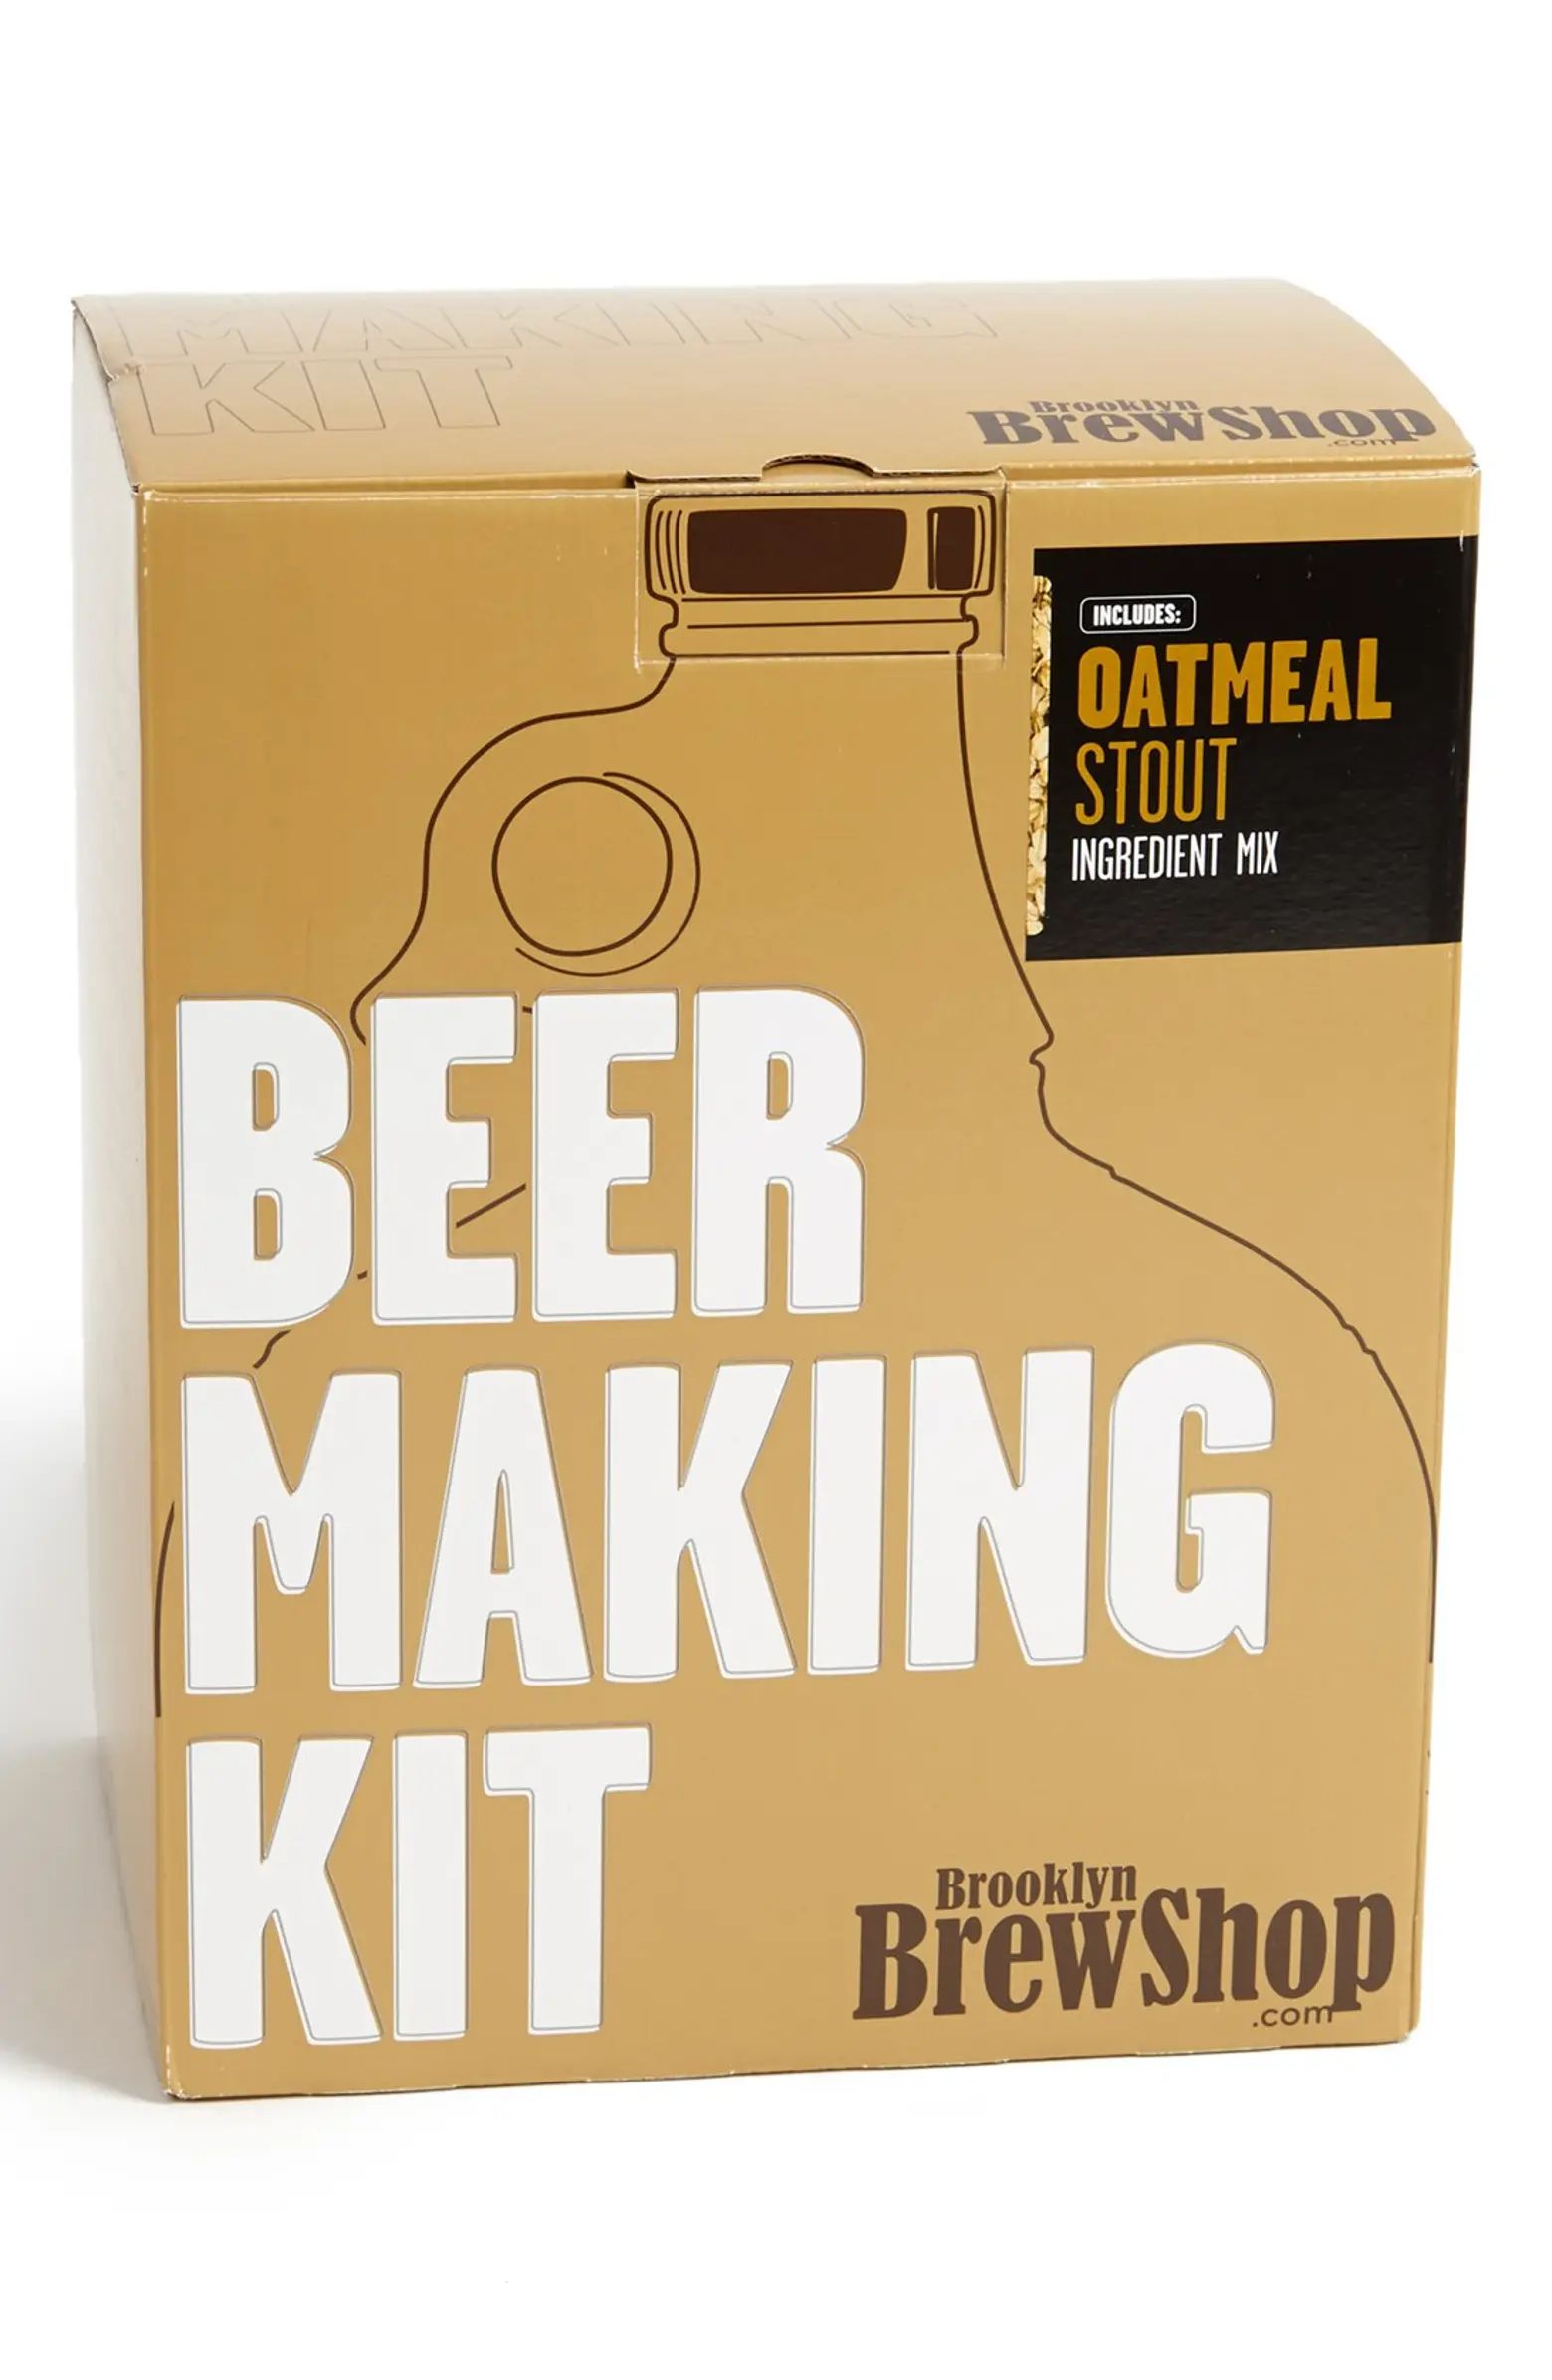 Brooklyn Brew Shop 'Oatmeal Stout' One Gallon Beer Making Kit | Nordstrom | Nordstrom